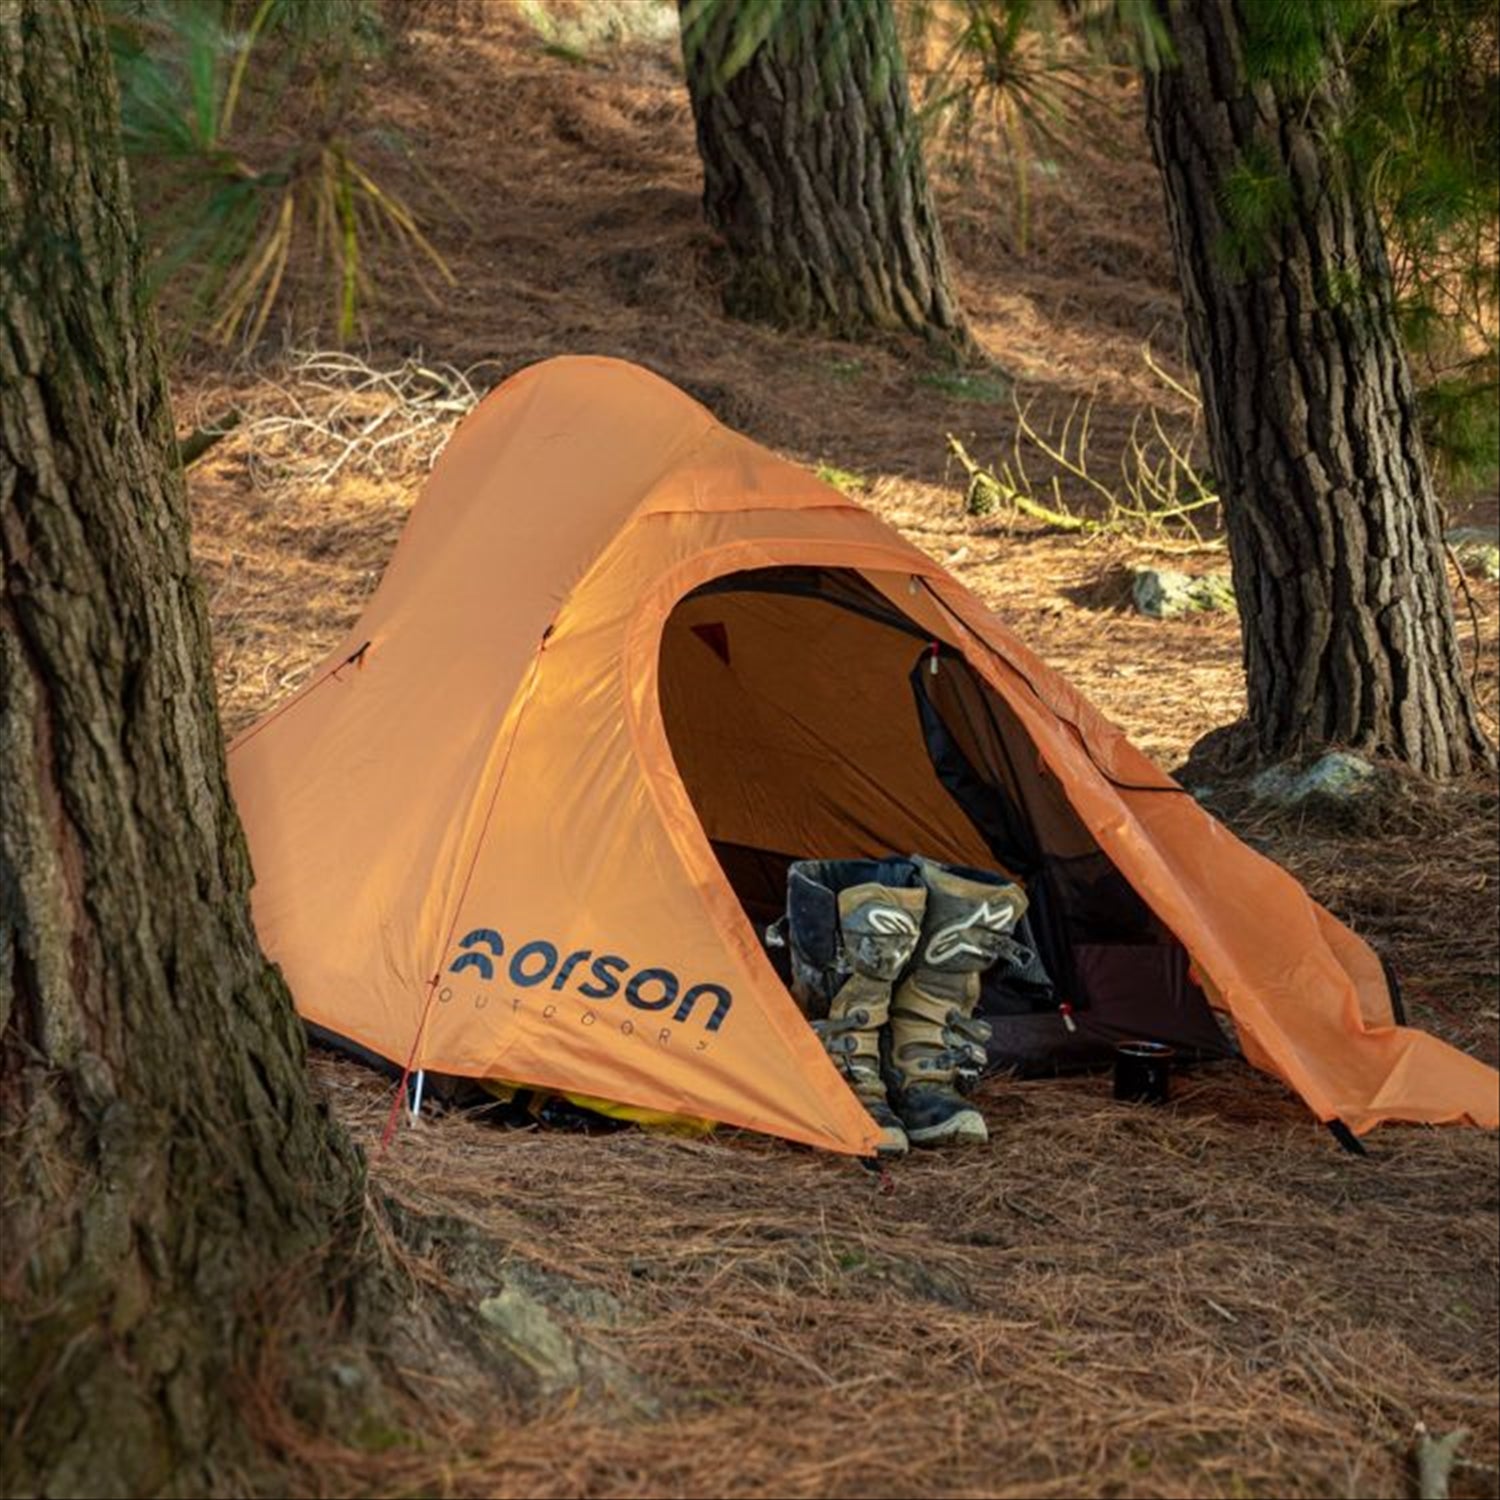 Orson Tracker 2 - Ripstop Lightweight 2 Person Hiking Tent, 1.95kg